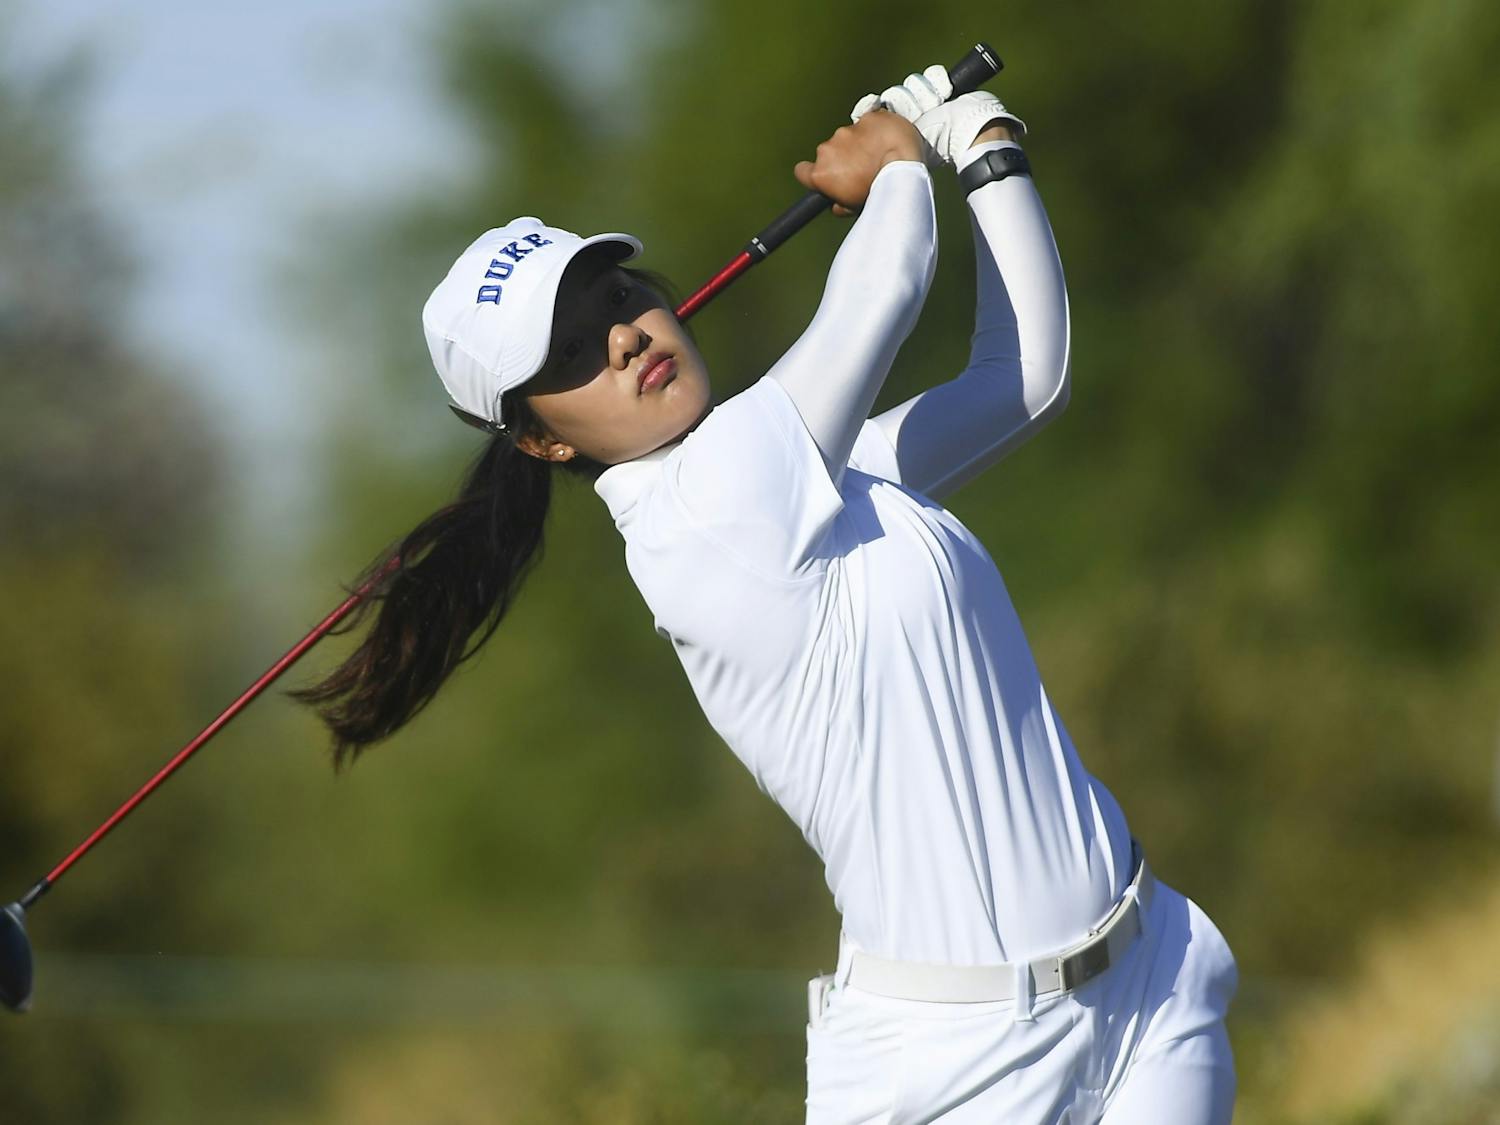 In her final collegiate event, Jaravee Boonchant helped the Blue Devils reach the Final Four.&nbsp;